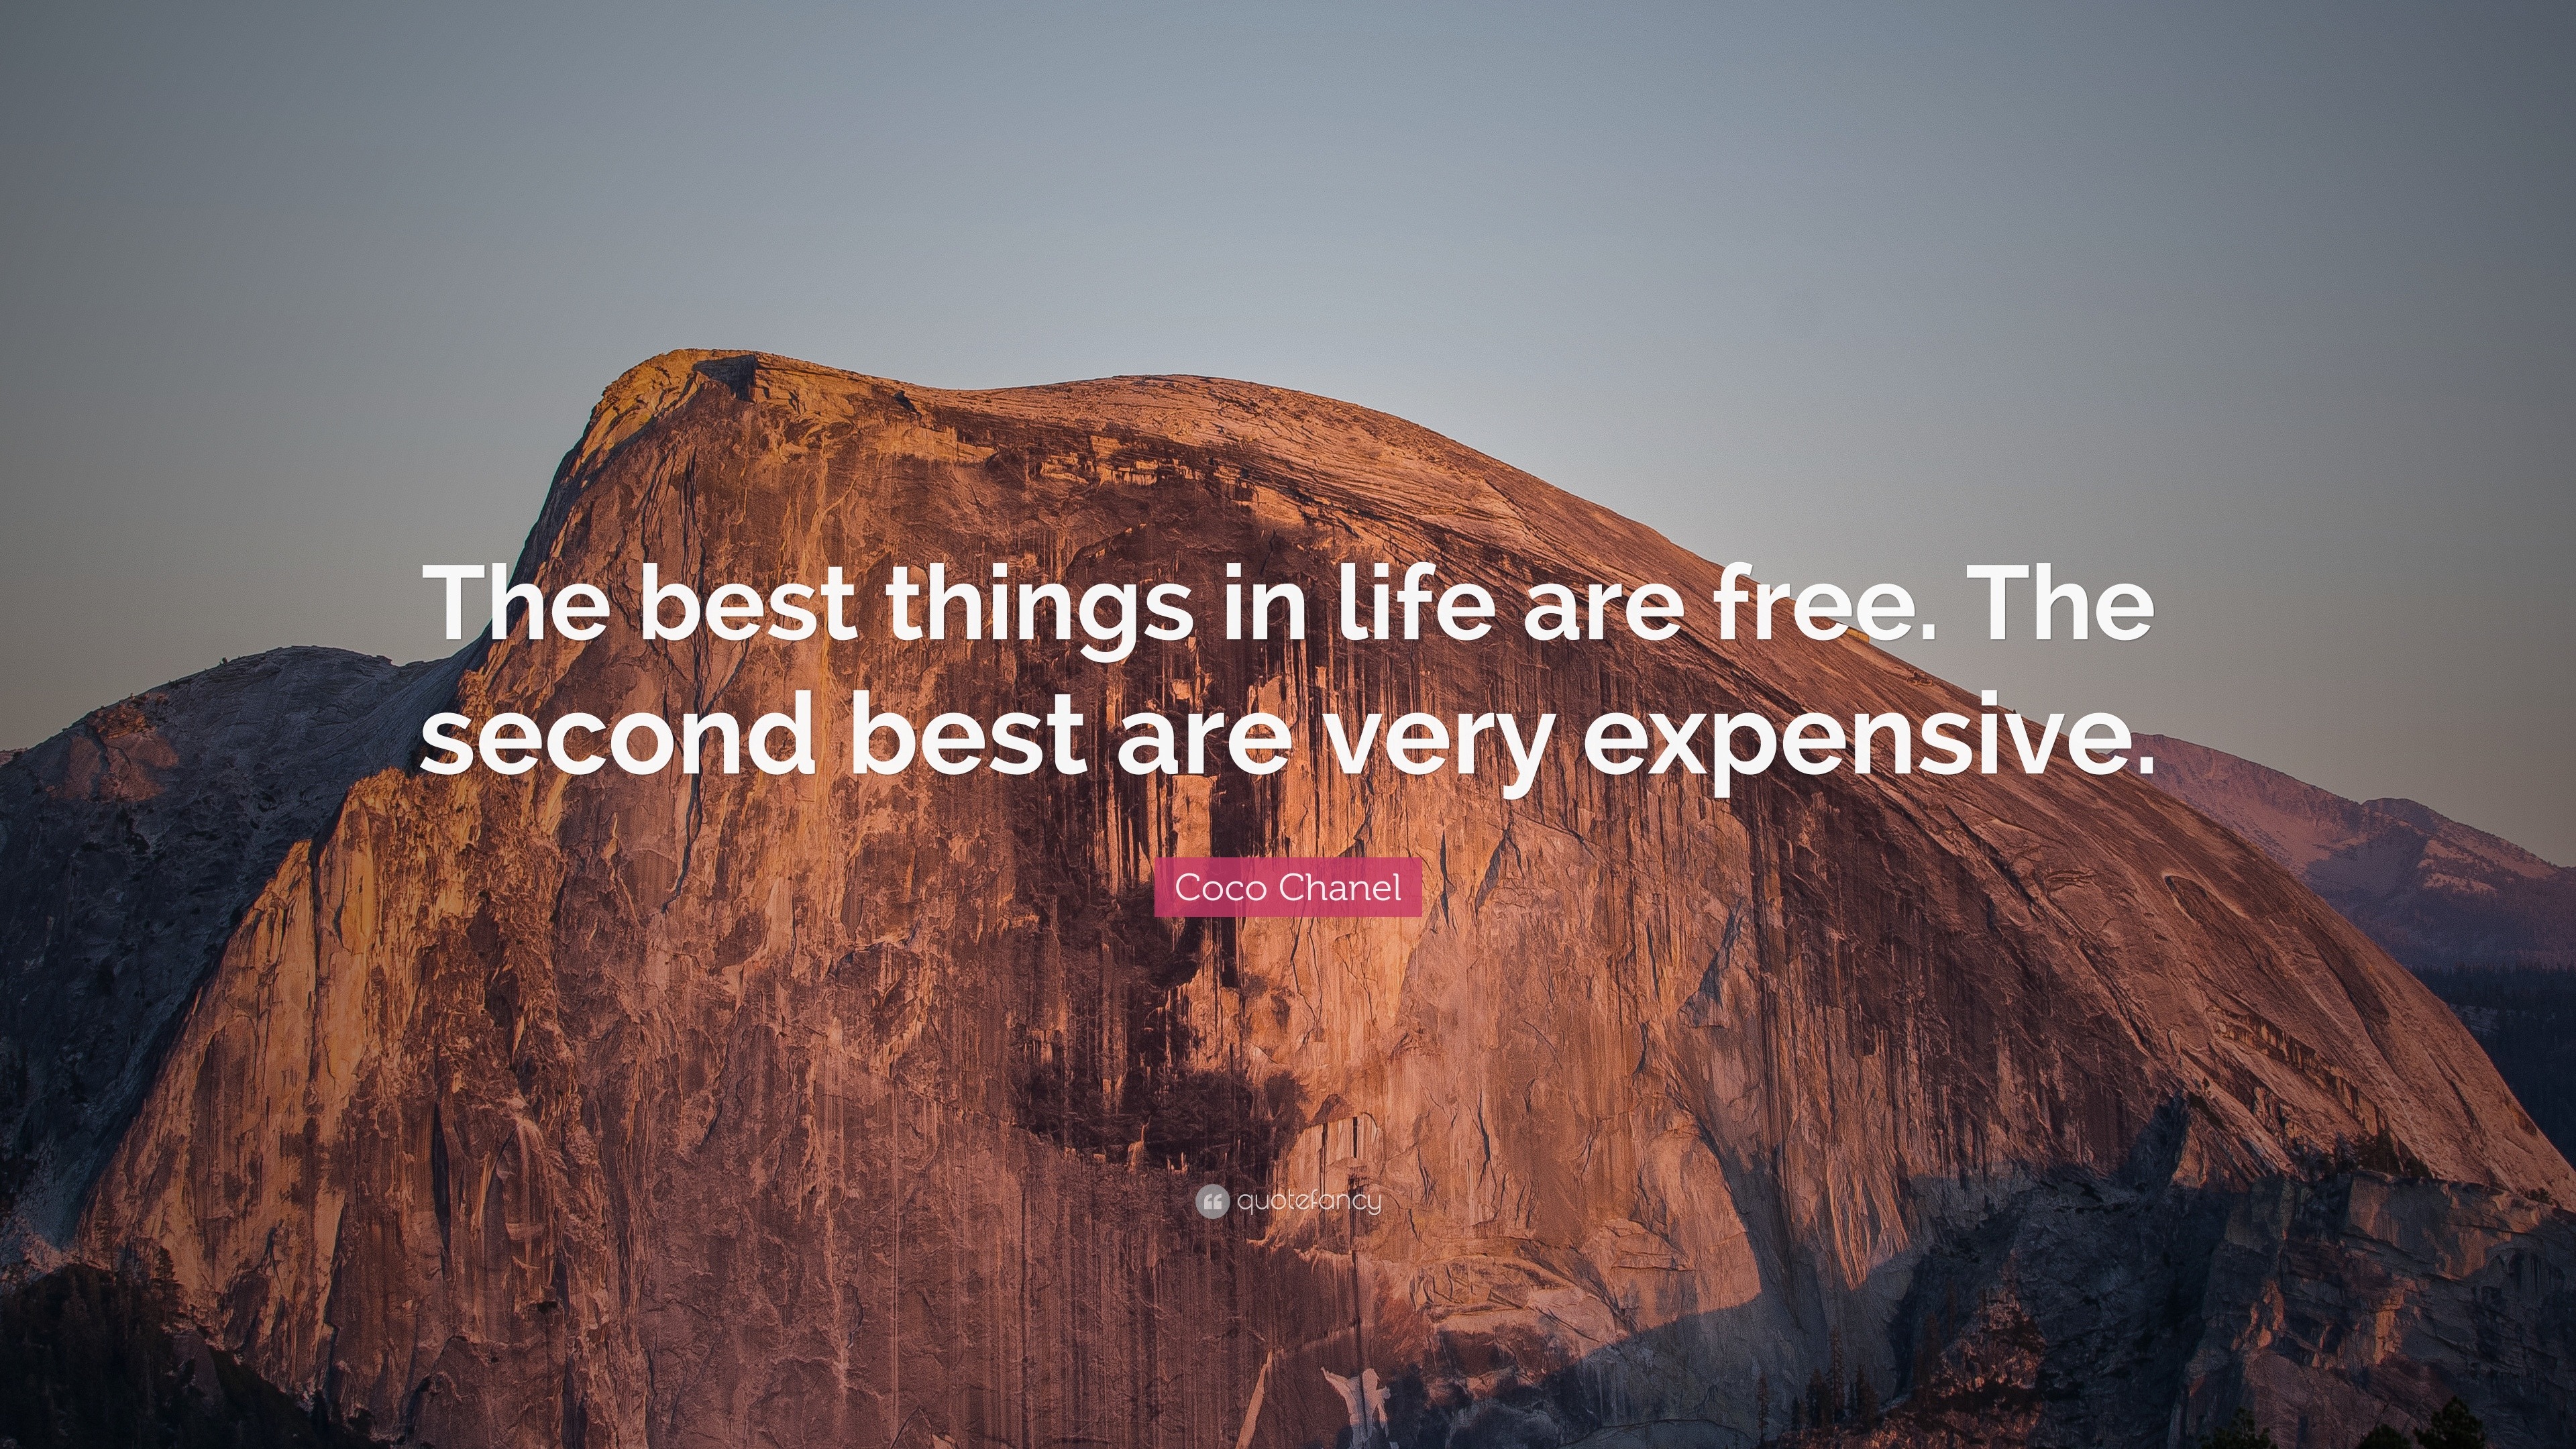 The best things in life are free. The rest are too expensive.